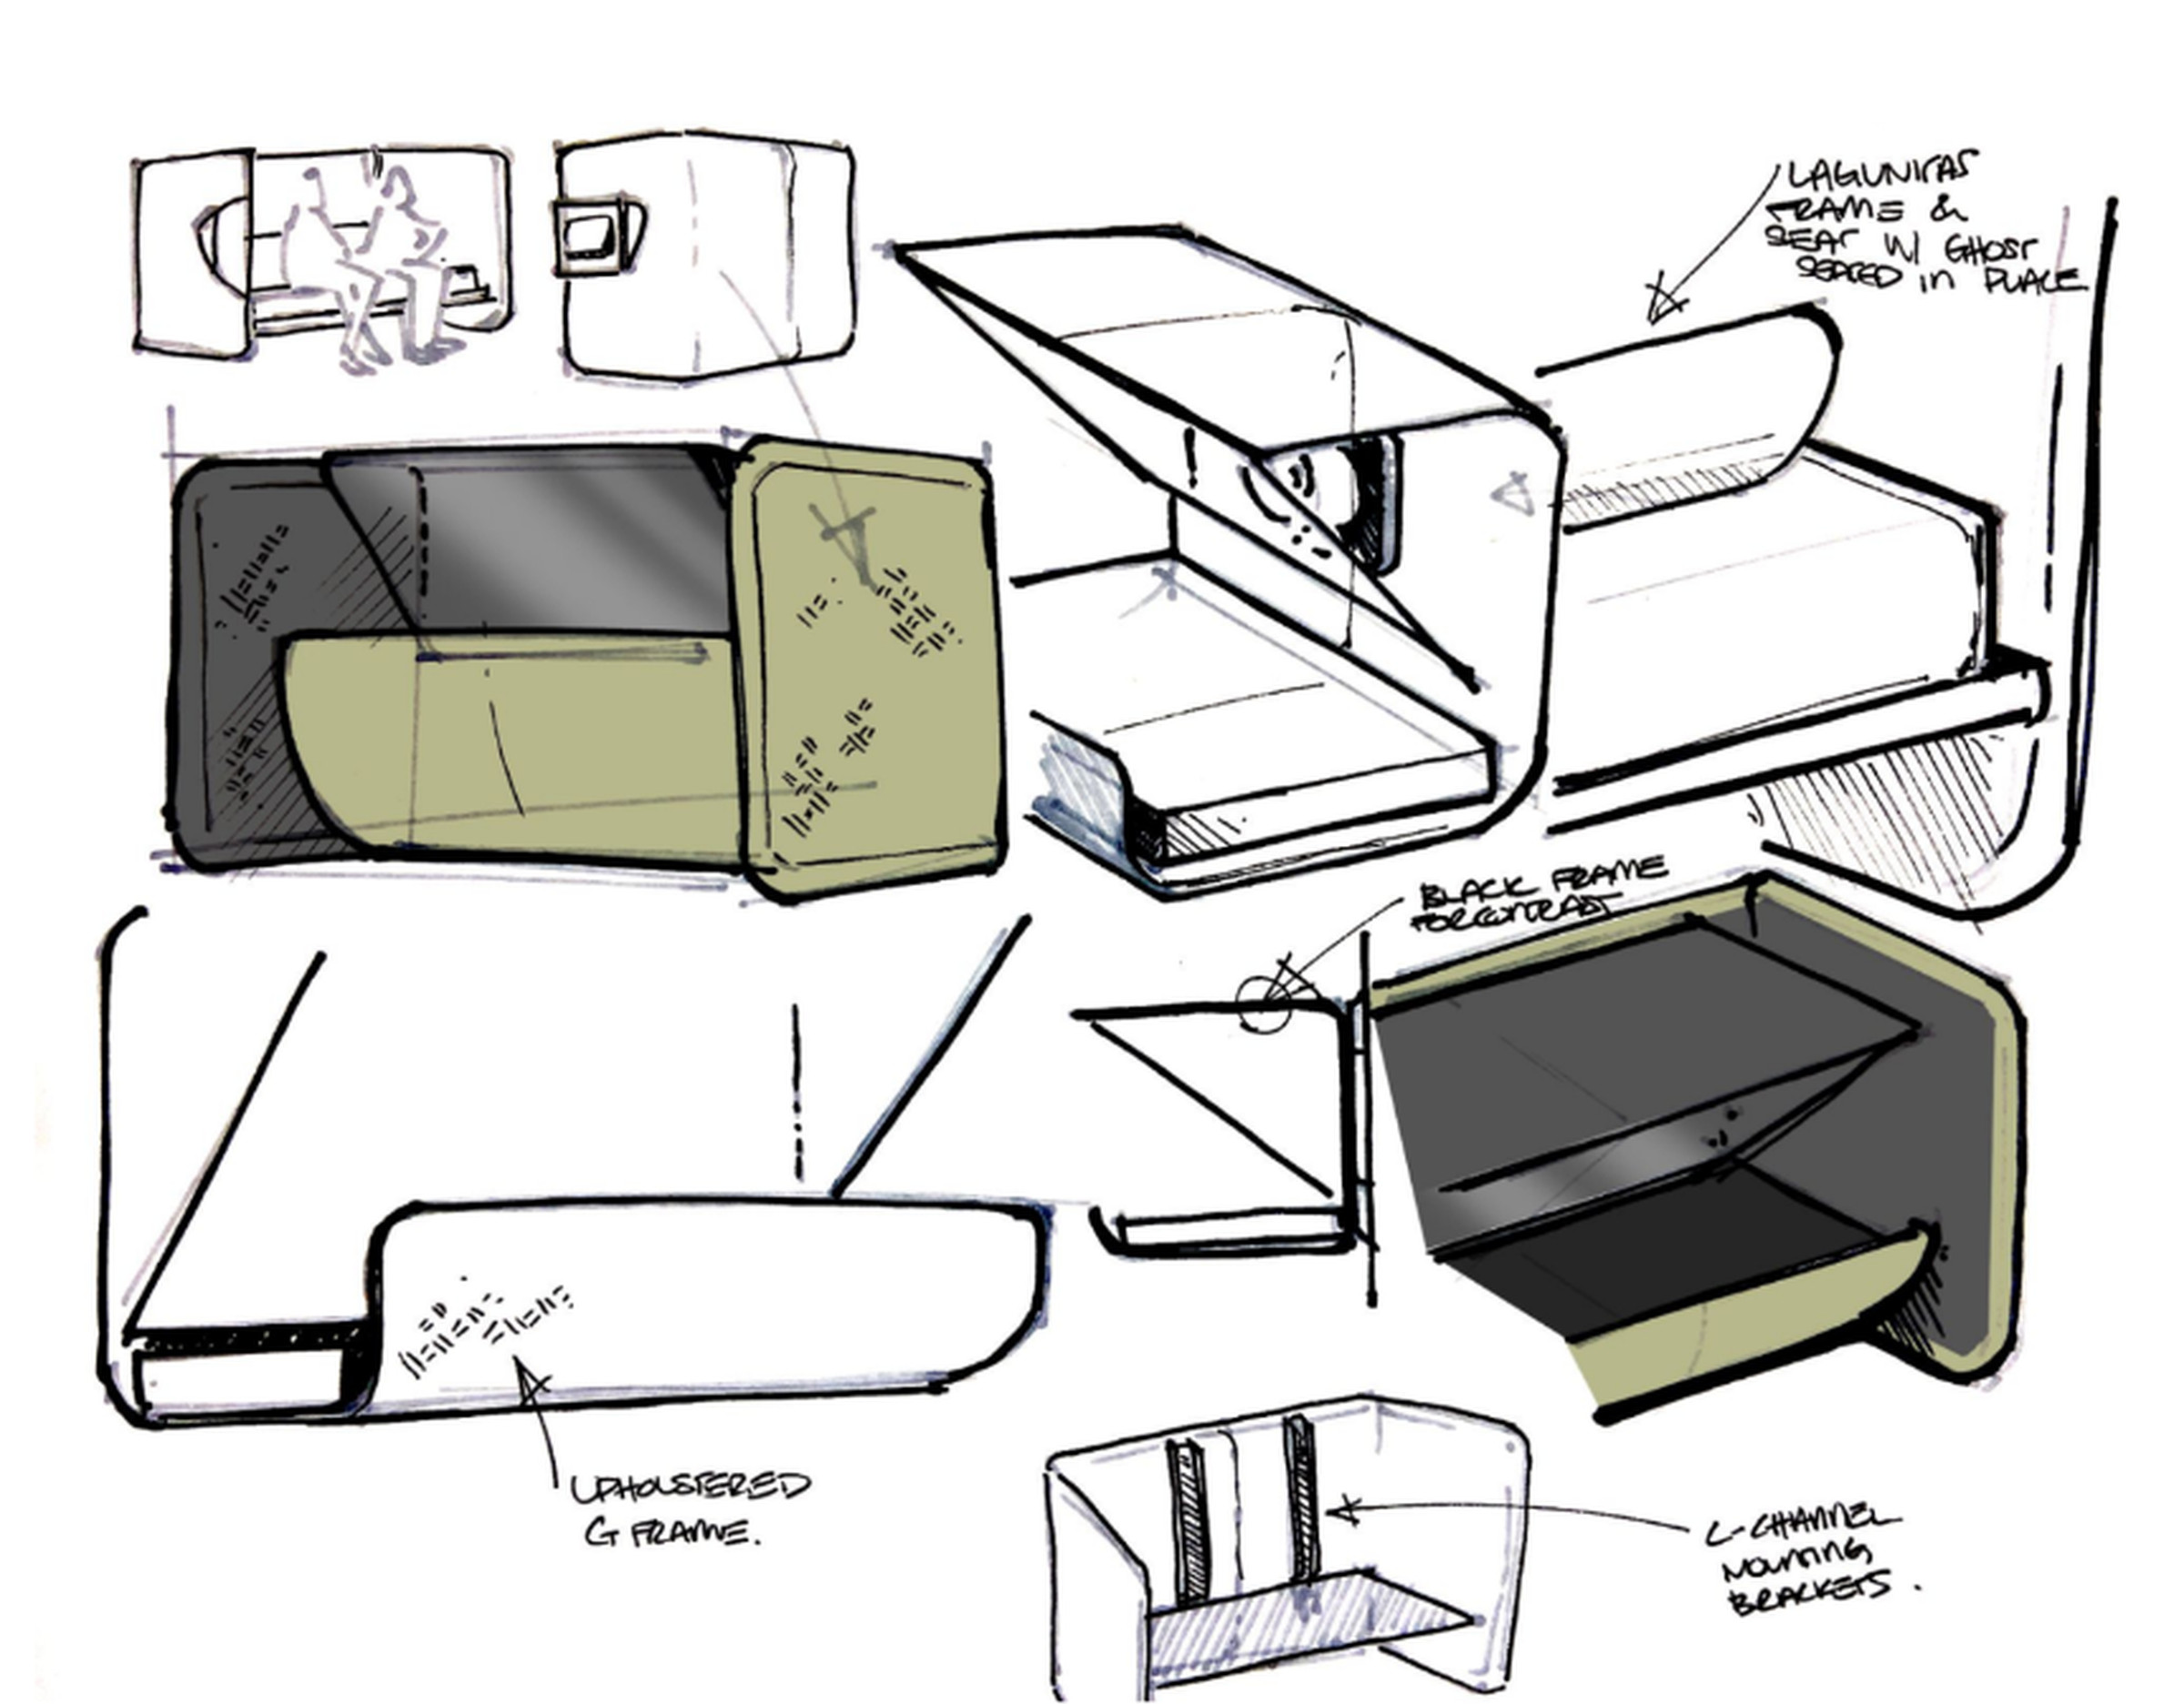 Sketches from Logitech showing how the Project Ghost display is set up.